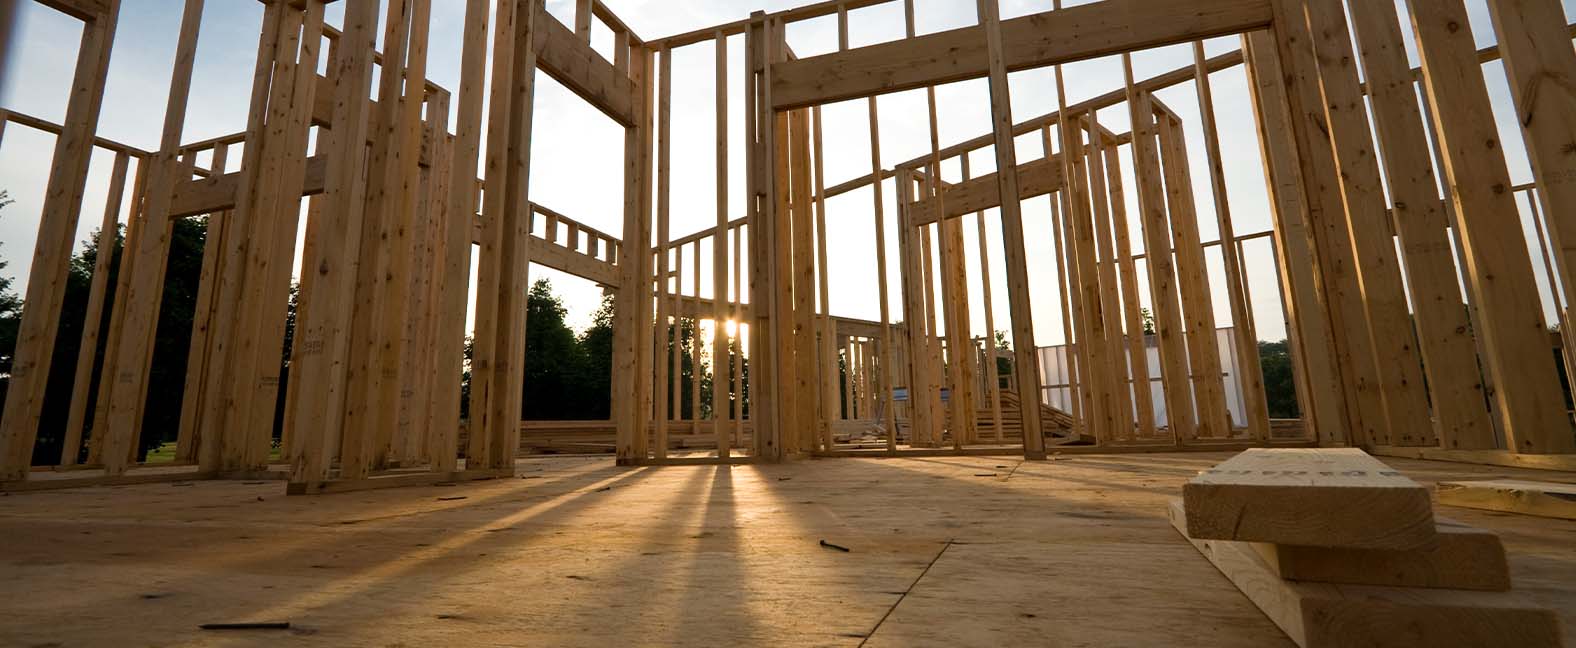 The frame of a new home is constructed with additional lumber sitting in the foreground.